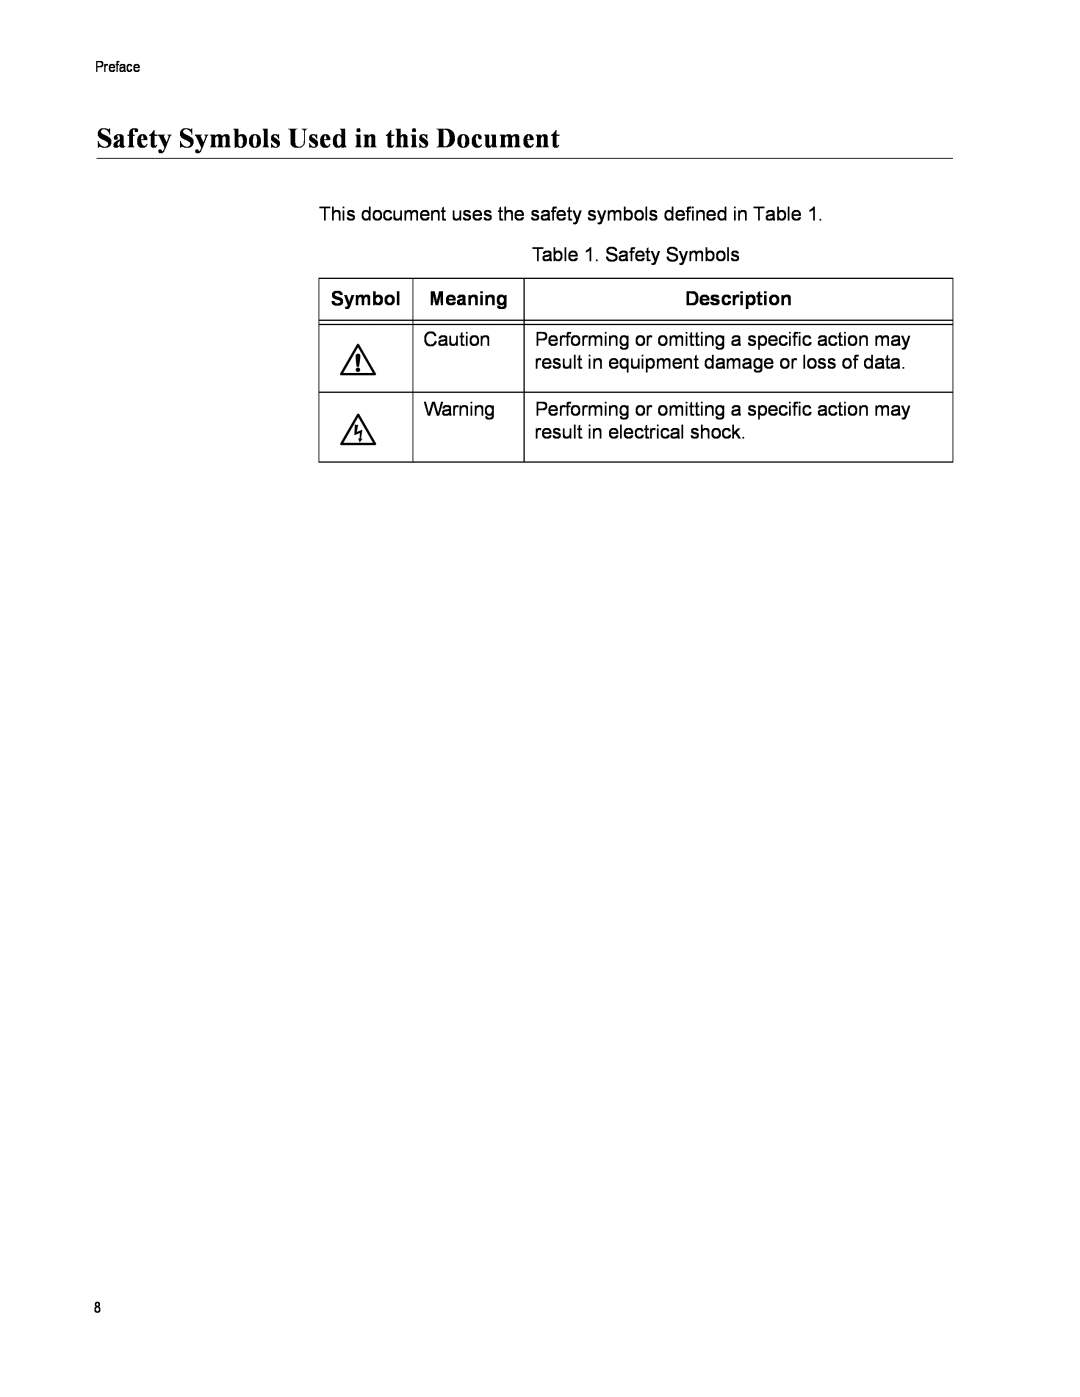 Allied Telesis GS900/5E manual Safety Symbols Used in this Document, Meaning, Description, Preface 